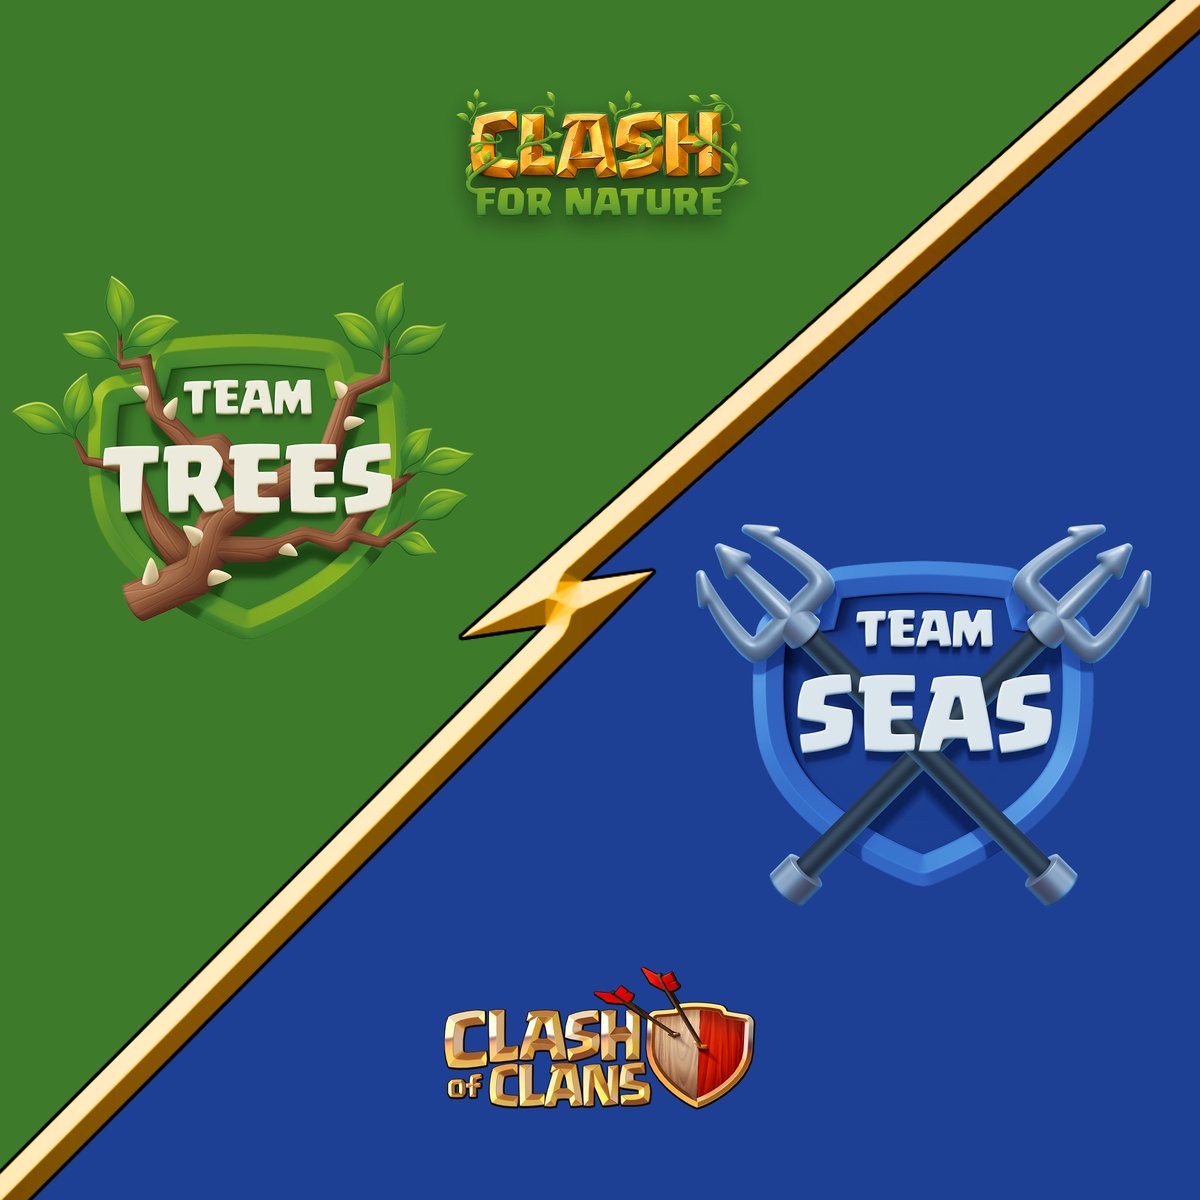 We’re thrilled to announce our partnership with @Supercell for Clash for Nature! 

Engage in epic Clash of Clans battles, accumulate gold for a greener world, and choose your team to support a good cause. 

What team will you be joining? #ClashForNature #GamingForGood